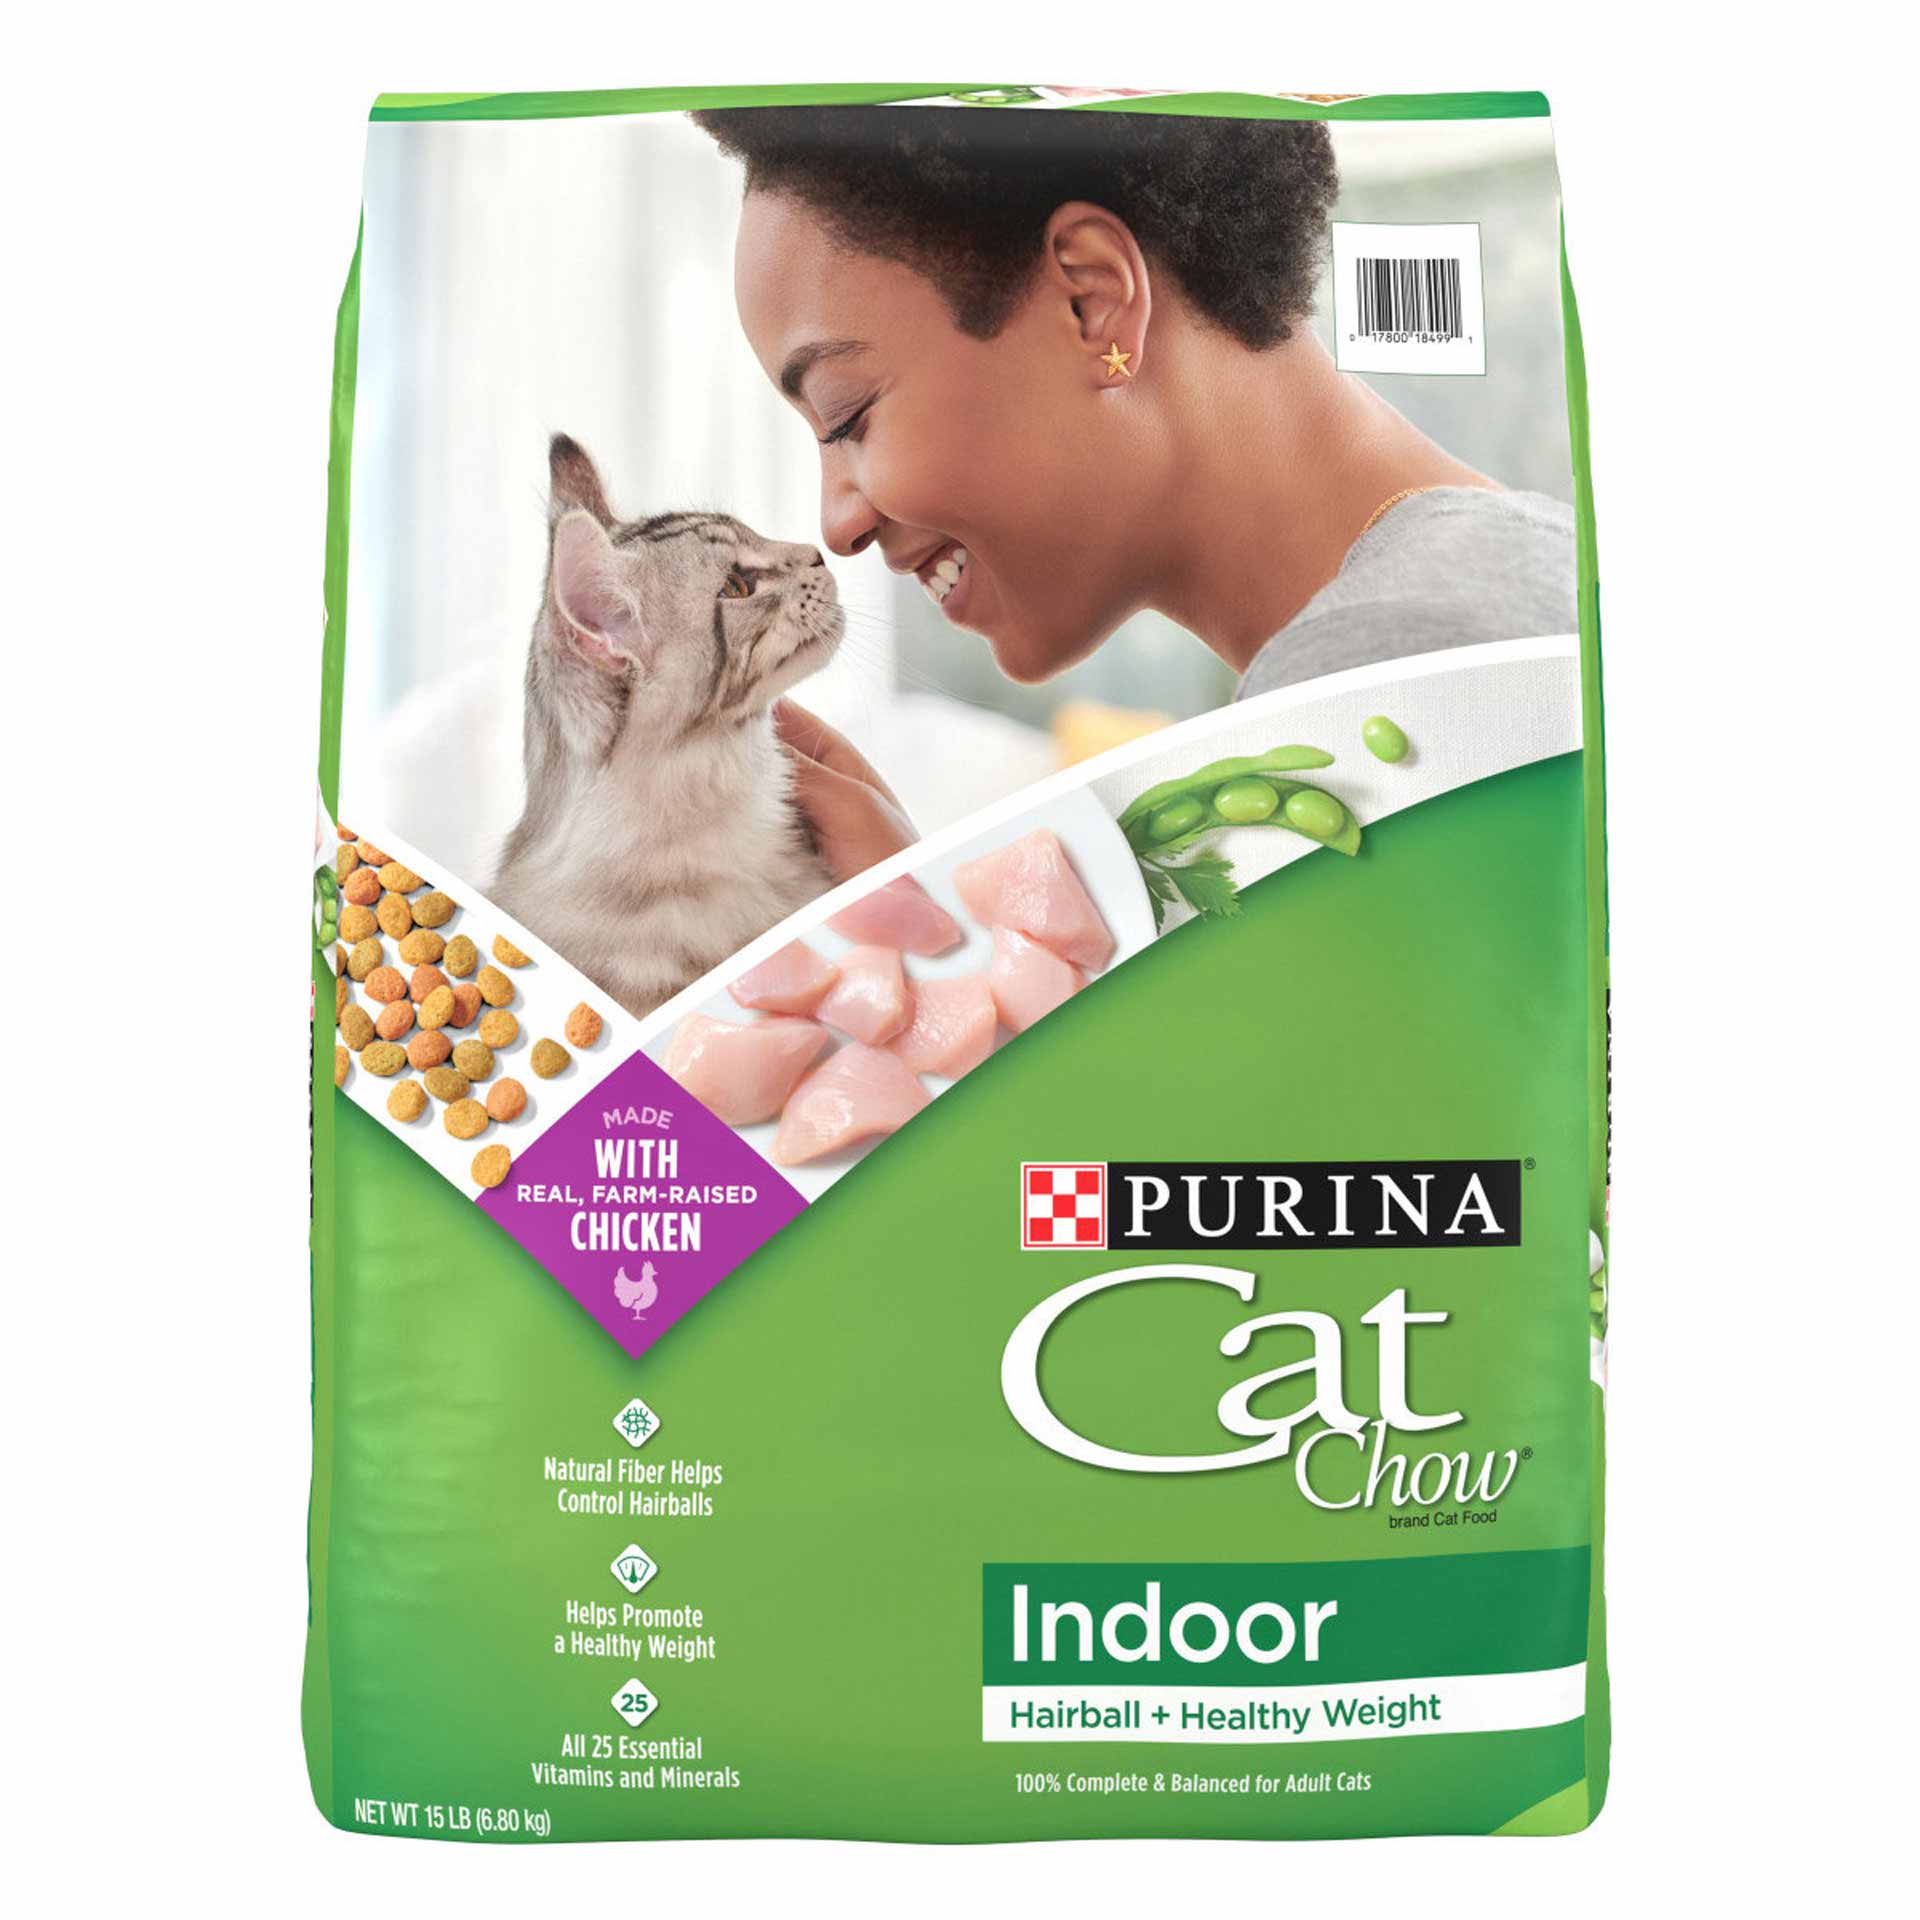 Purina Cat Chow Indoor Dry Cat Food, Hairball + Healthy Weight - 15 Pound Bag